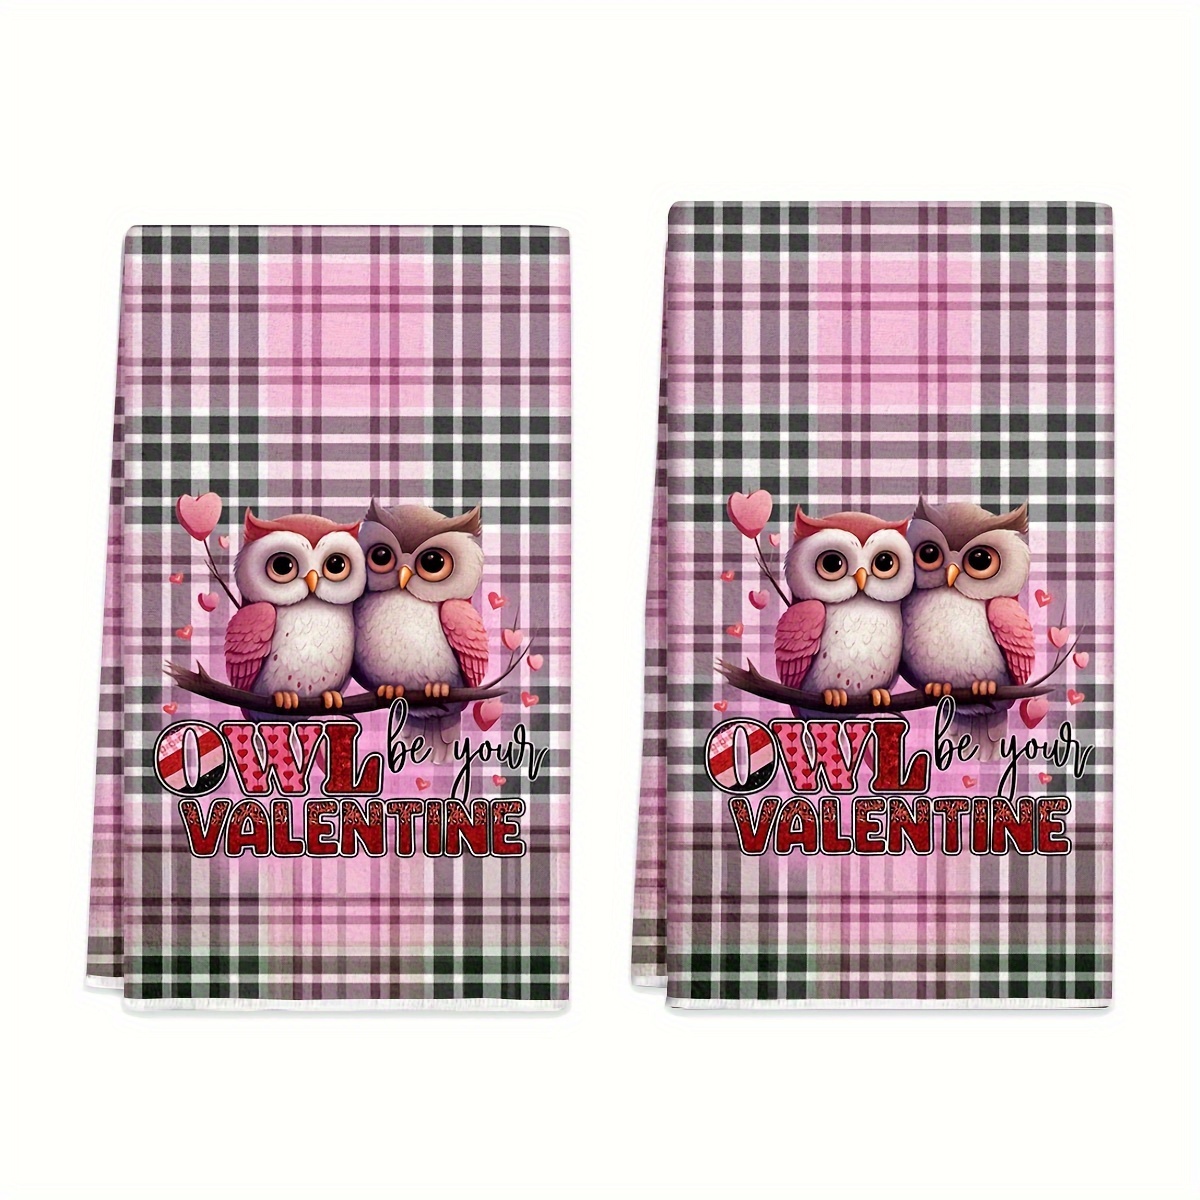 

2pcs, Hand Towels, Cute Owl Plaid Printed Dish Towels, Ultra-fine Microfiber Contemporary Absorbent Dish Cloths, Tea Towels For Cooking, Baking, Housewarming Gift